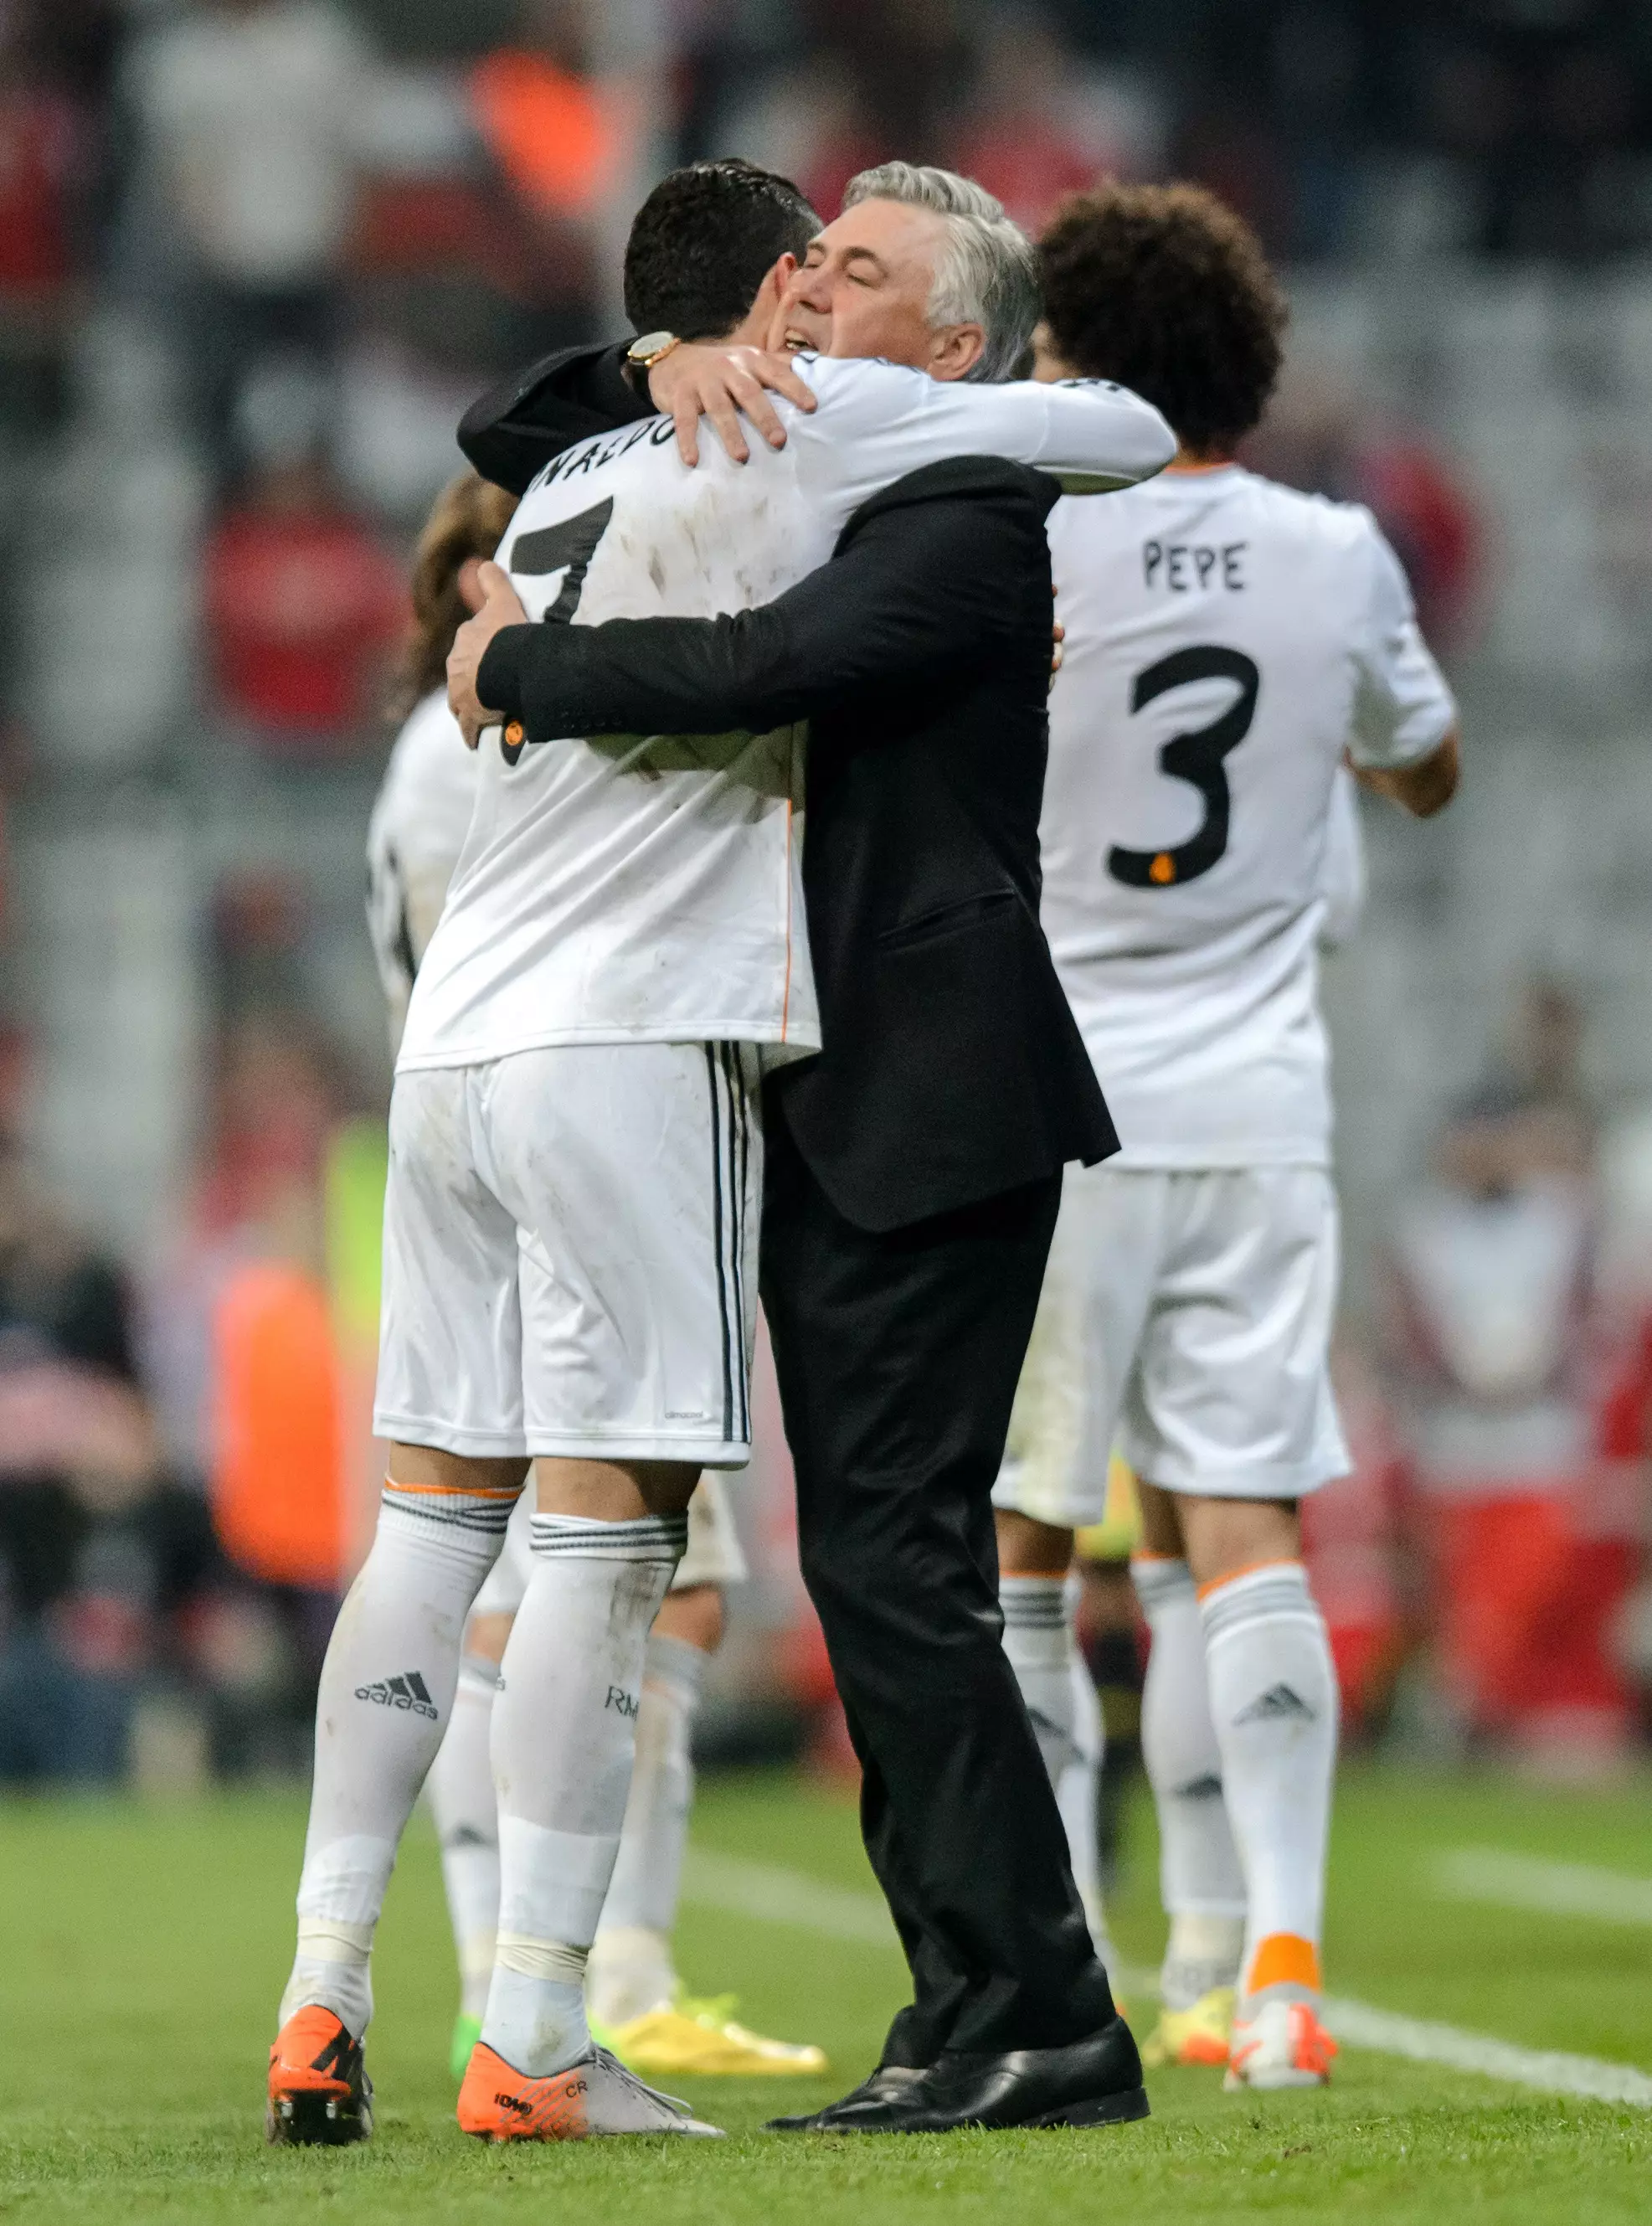 Ronaldo and Ancelotti embrace after a Champions League victory (Image